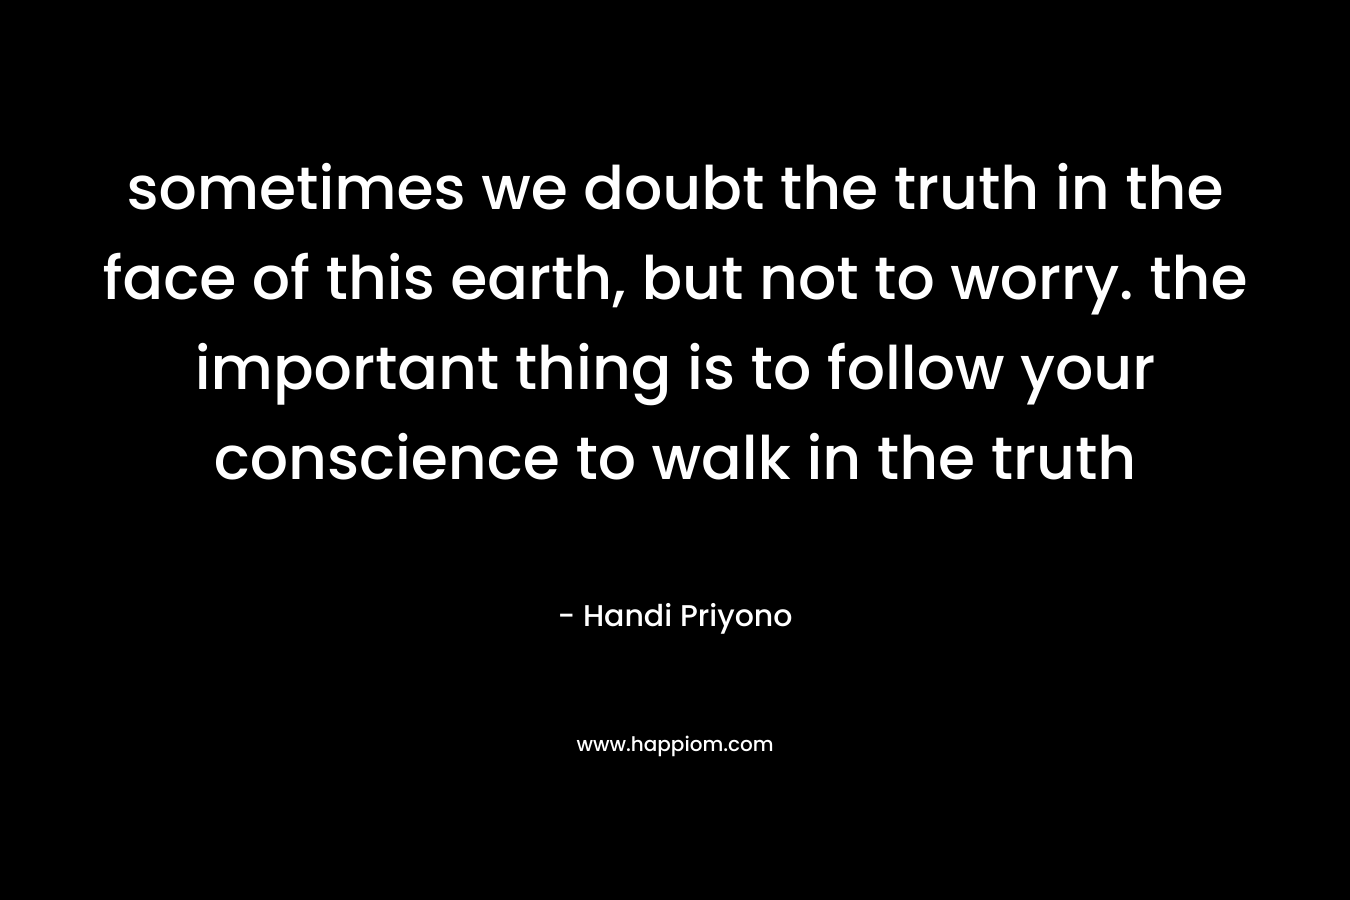 sometimes we doubt the truth in the face of this earth, but not to worry. the important thing is to follow your conscience to walk in the truth